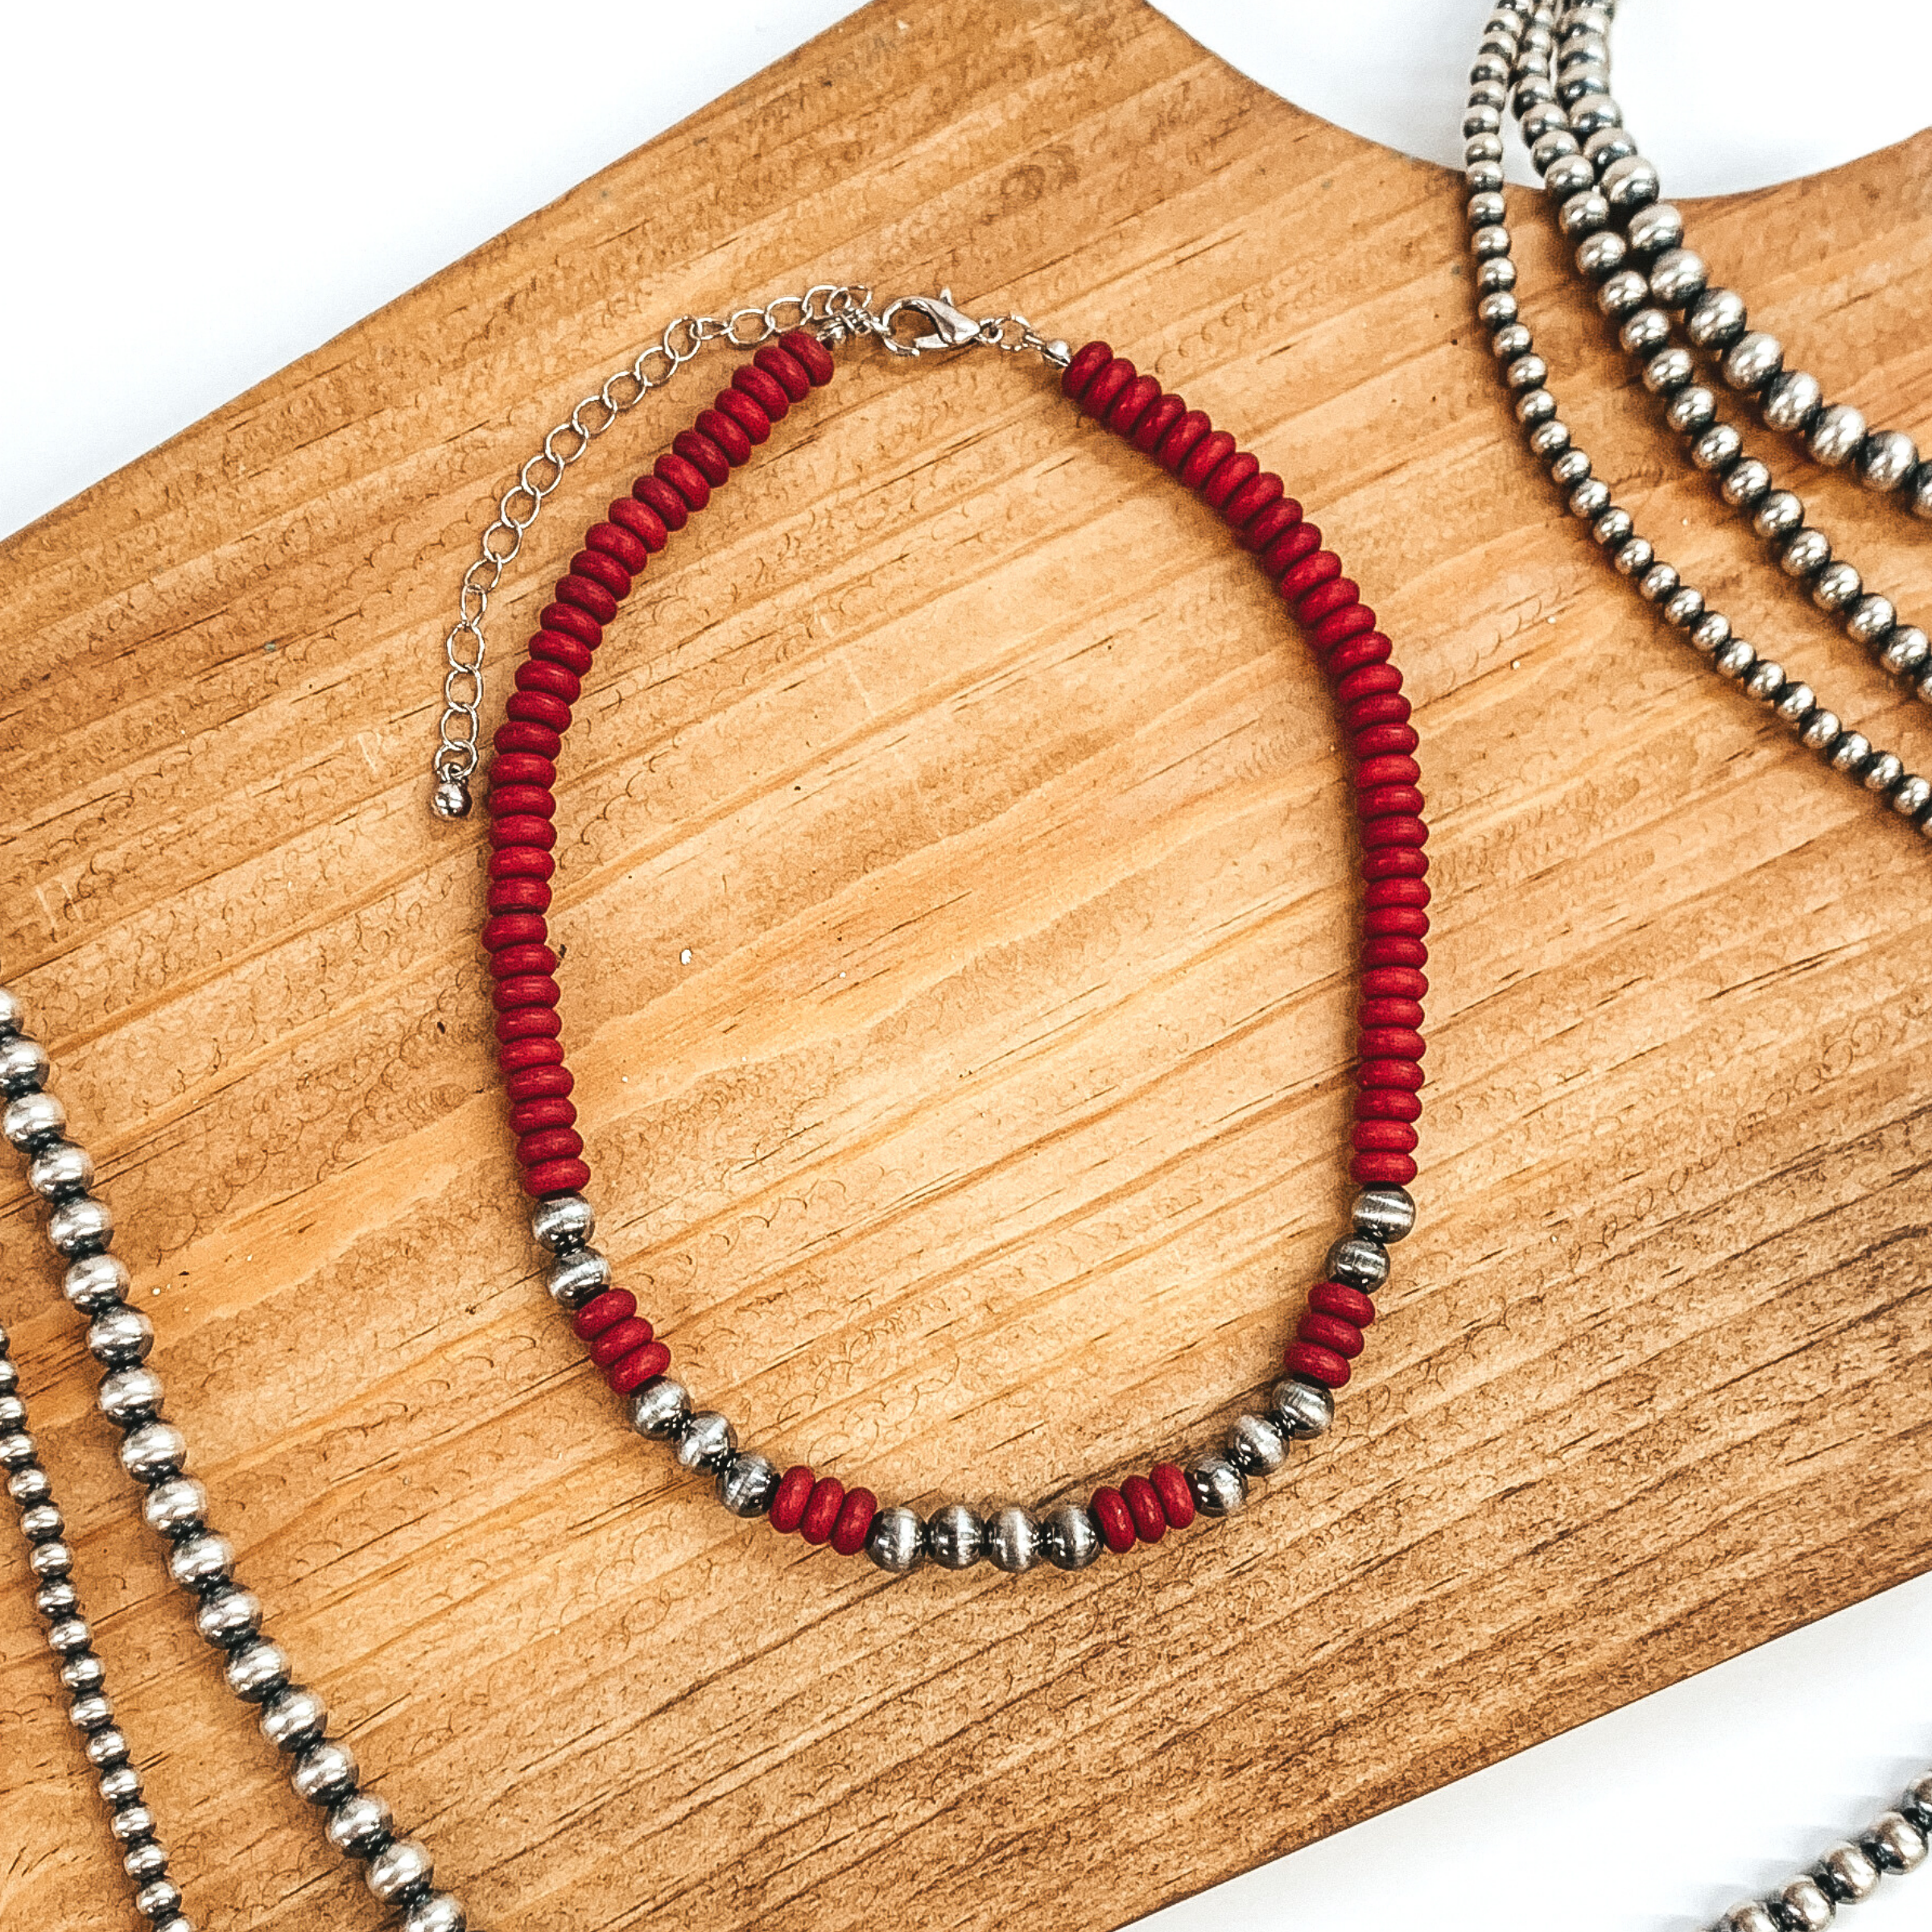 Beaded Stone Choker Necklace with Navajo Beads In Red - Giddy Up Glamour Boutique